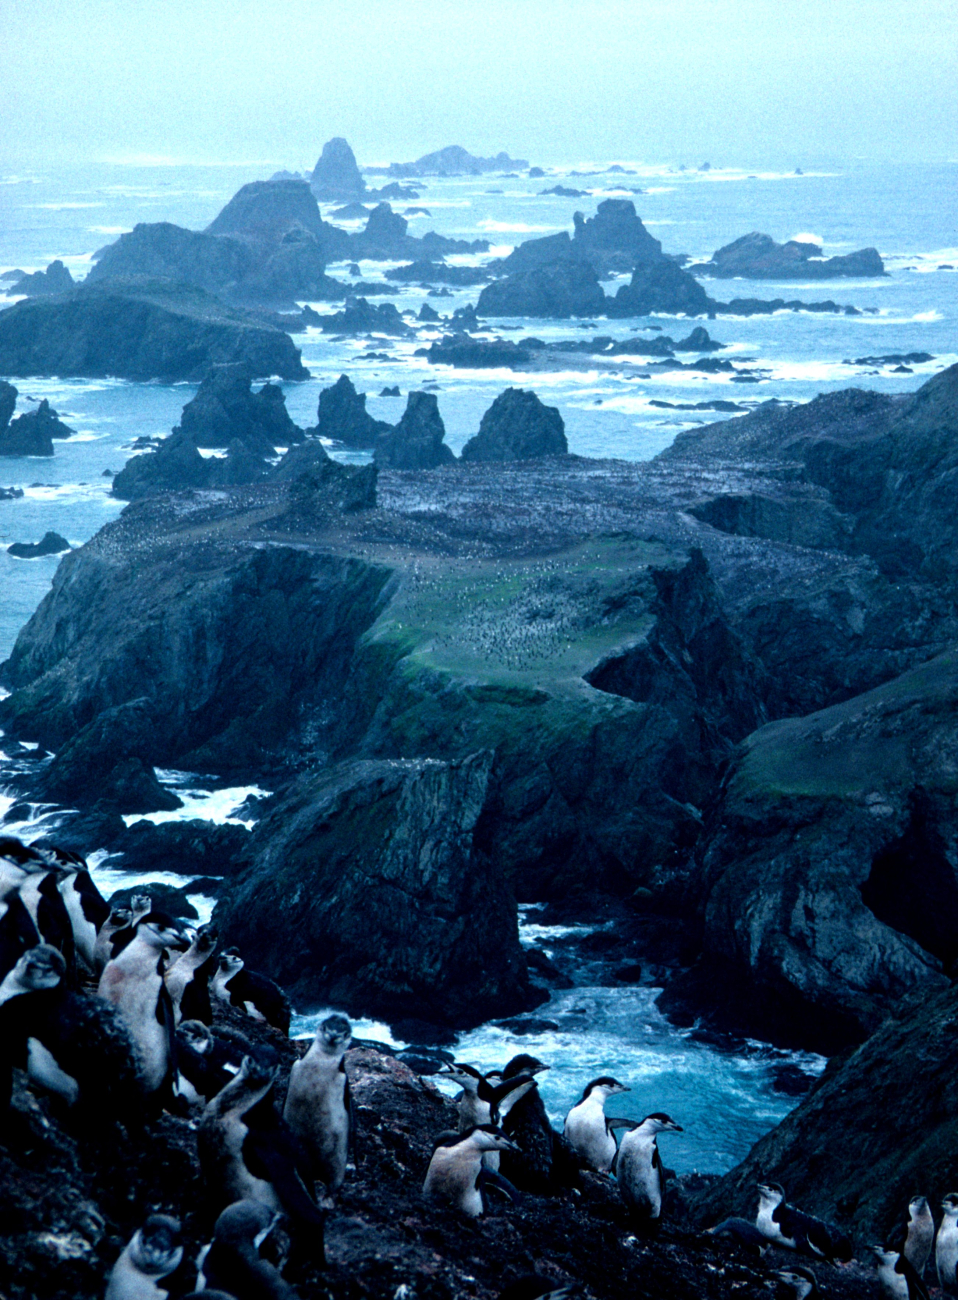 Overlooking a penguin colony on the rocky coast of Seal Island